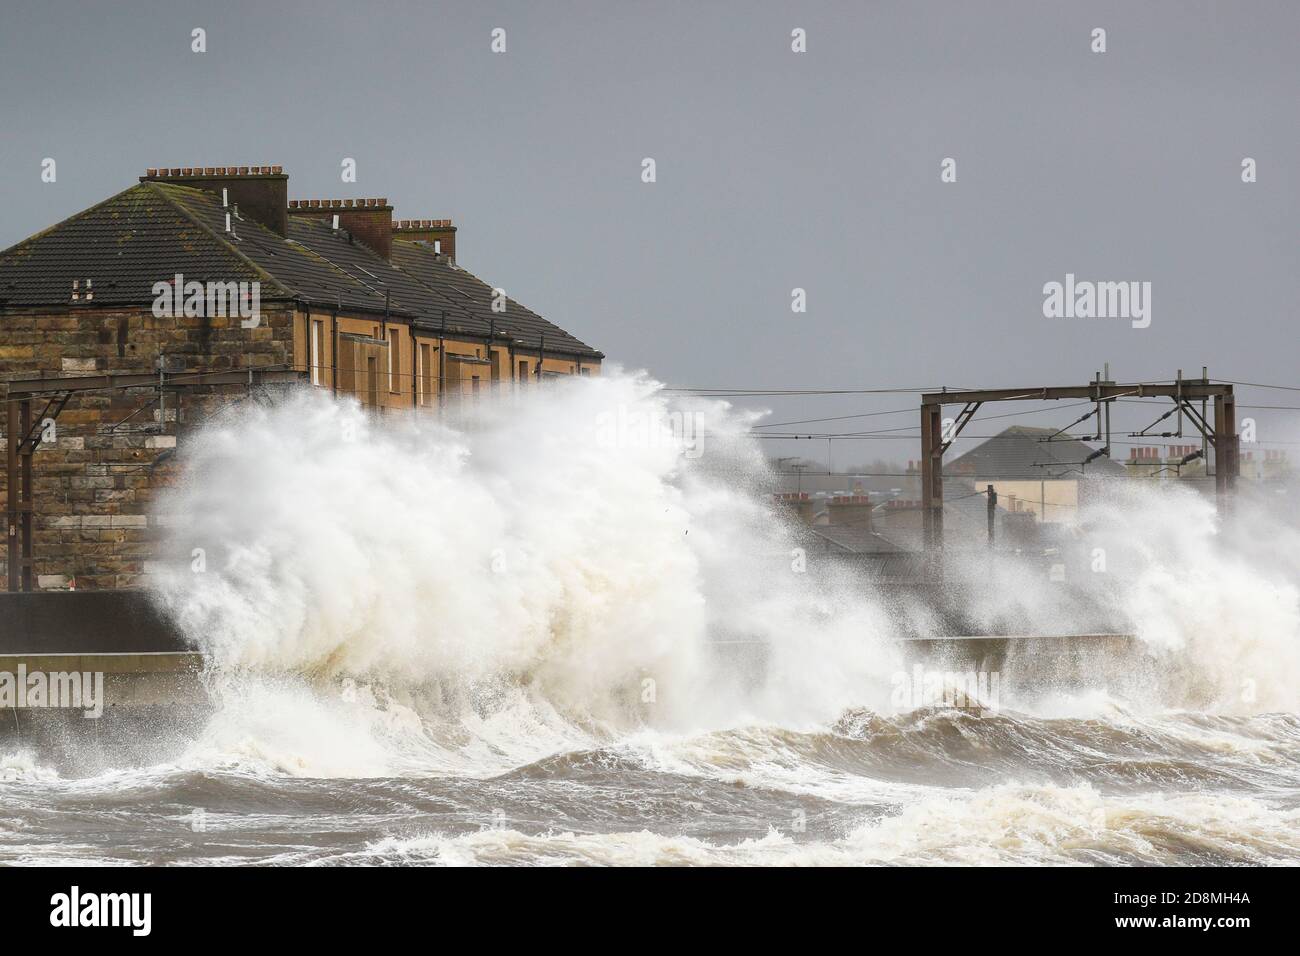 Saltcoats, UK. 31st Oct, 2020. The west coast of Scotland at Saltcoats on the Firth of Clyde was battered by high winds and rain as Hurricane Oscar barrelled across the Atlantic bringing stormy conditions and possible flooding. The waves were so high and dangerous that Scotrail had to withdraw all electric trains on the Kilwinning to Ardrossan line and try to maintain a service using diesel engines. Credit; Credit: Findlay/Alamy Live News Stock Photo